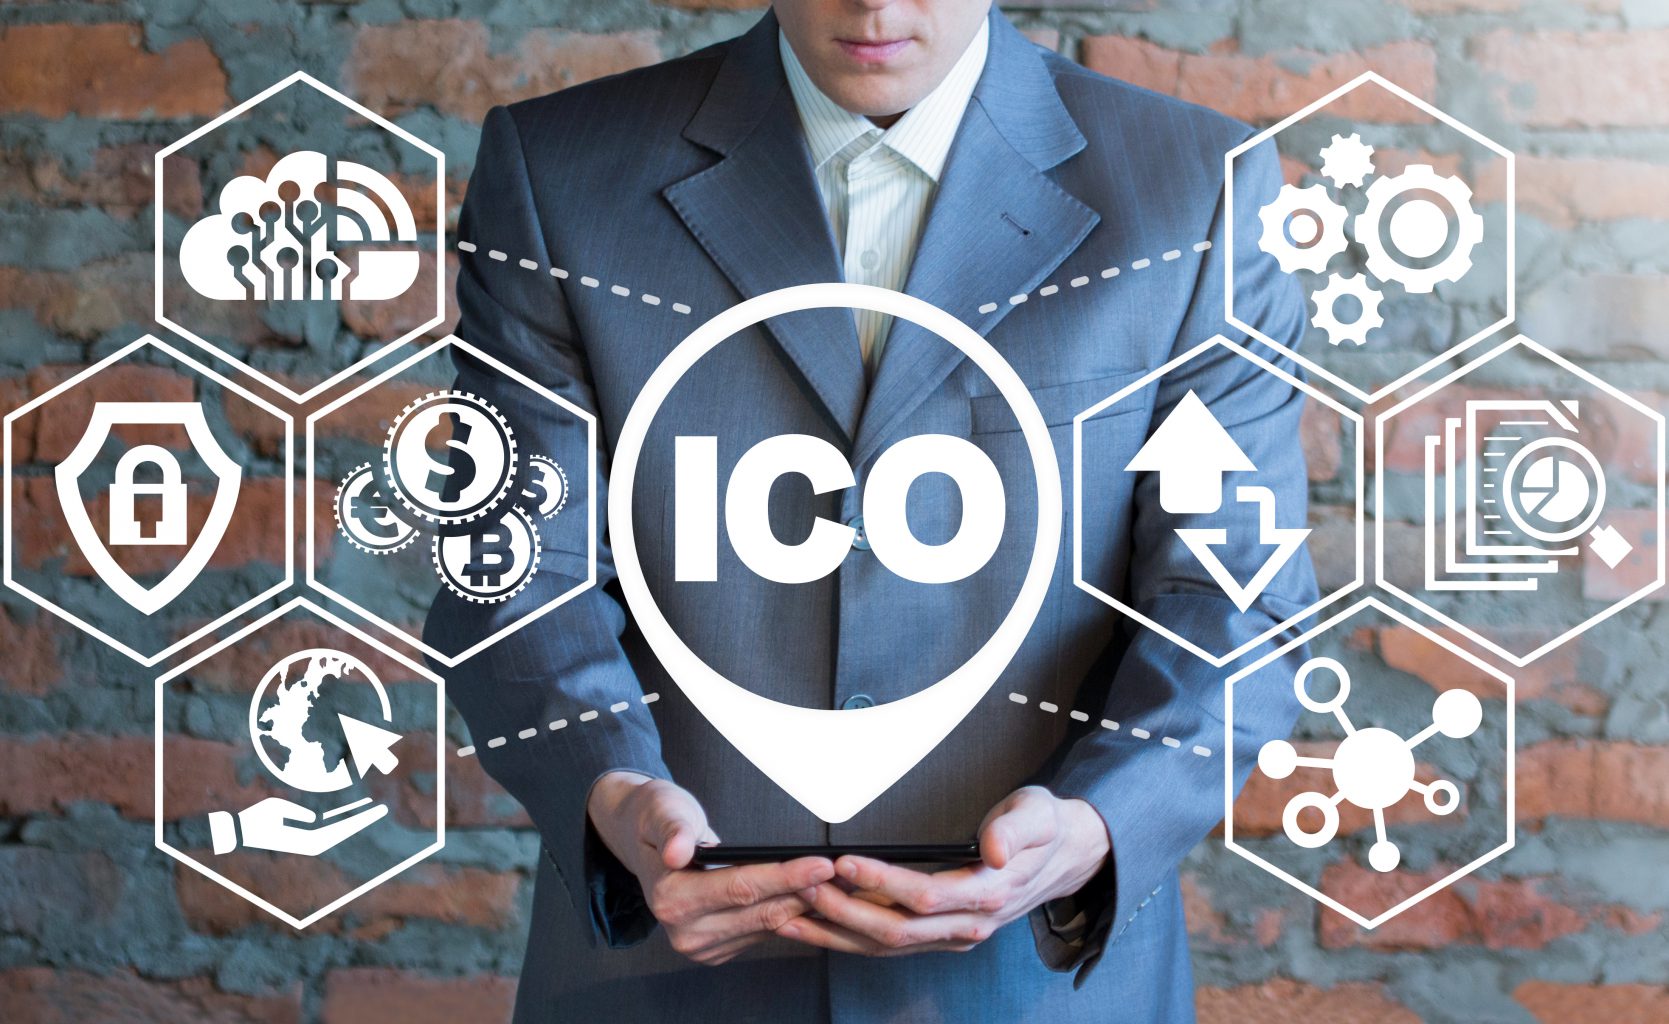 Man using smartphone with ICO (Initial Coin Offering) icon on a virtual screen. ICO Digital Electronic Trade Market Stock Index concept.